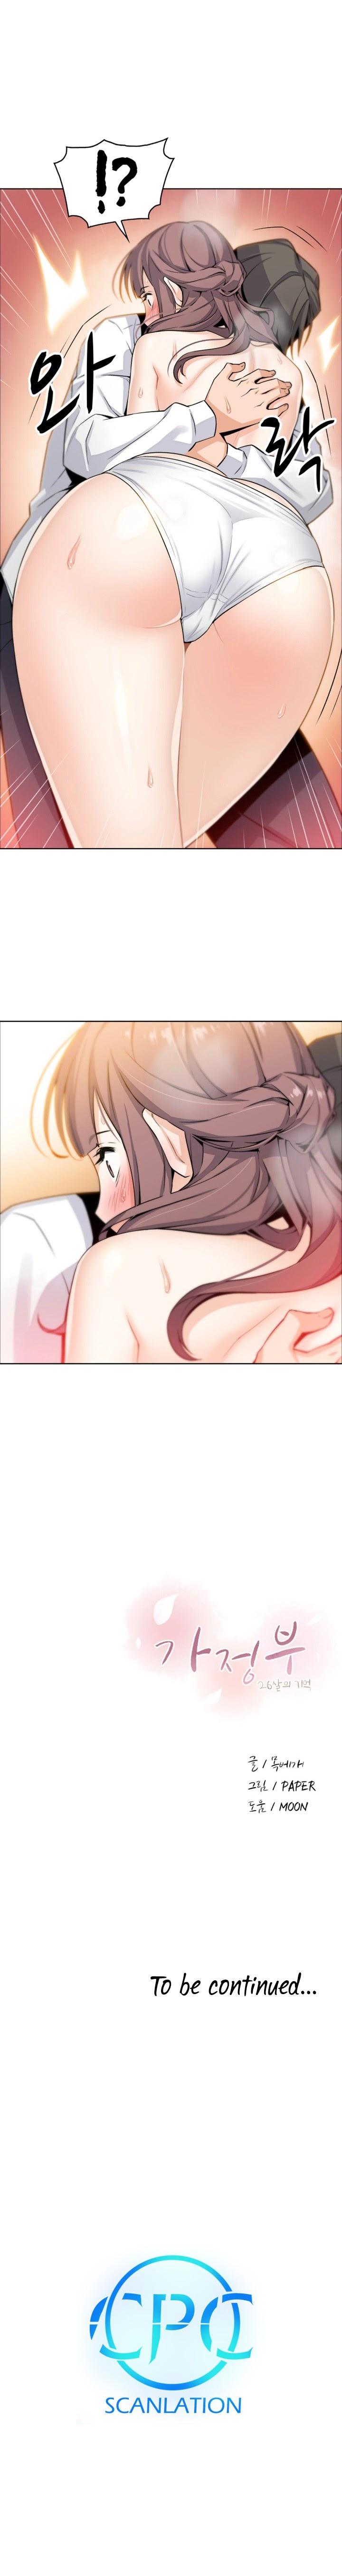 Housekeeper [Neck Pillow, Paper] Ch.49/49 [English] [Manhwa PDF] Completed 92